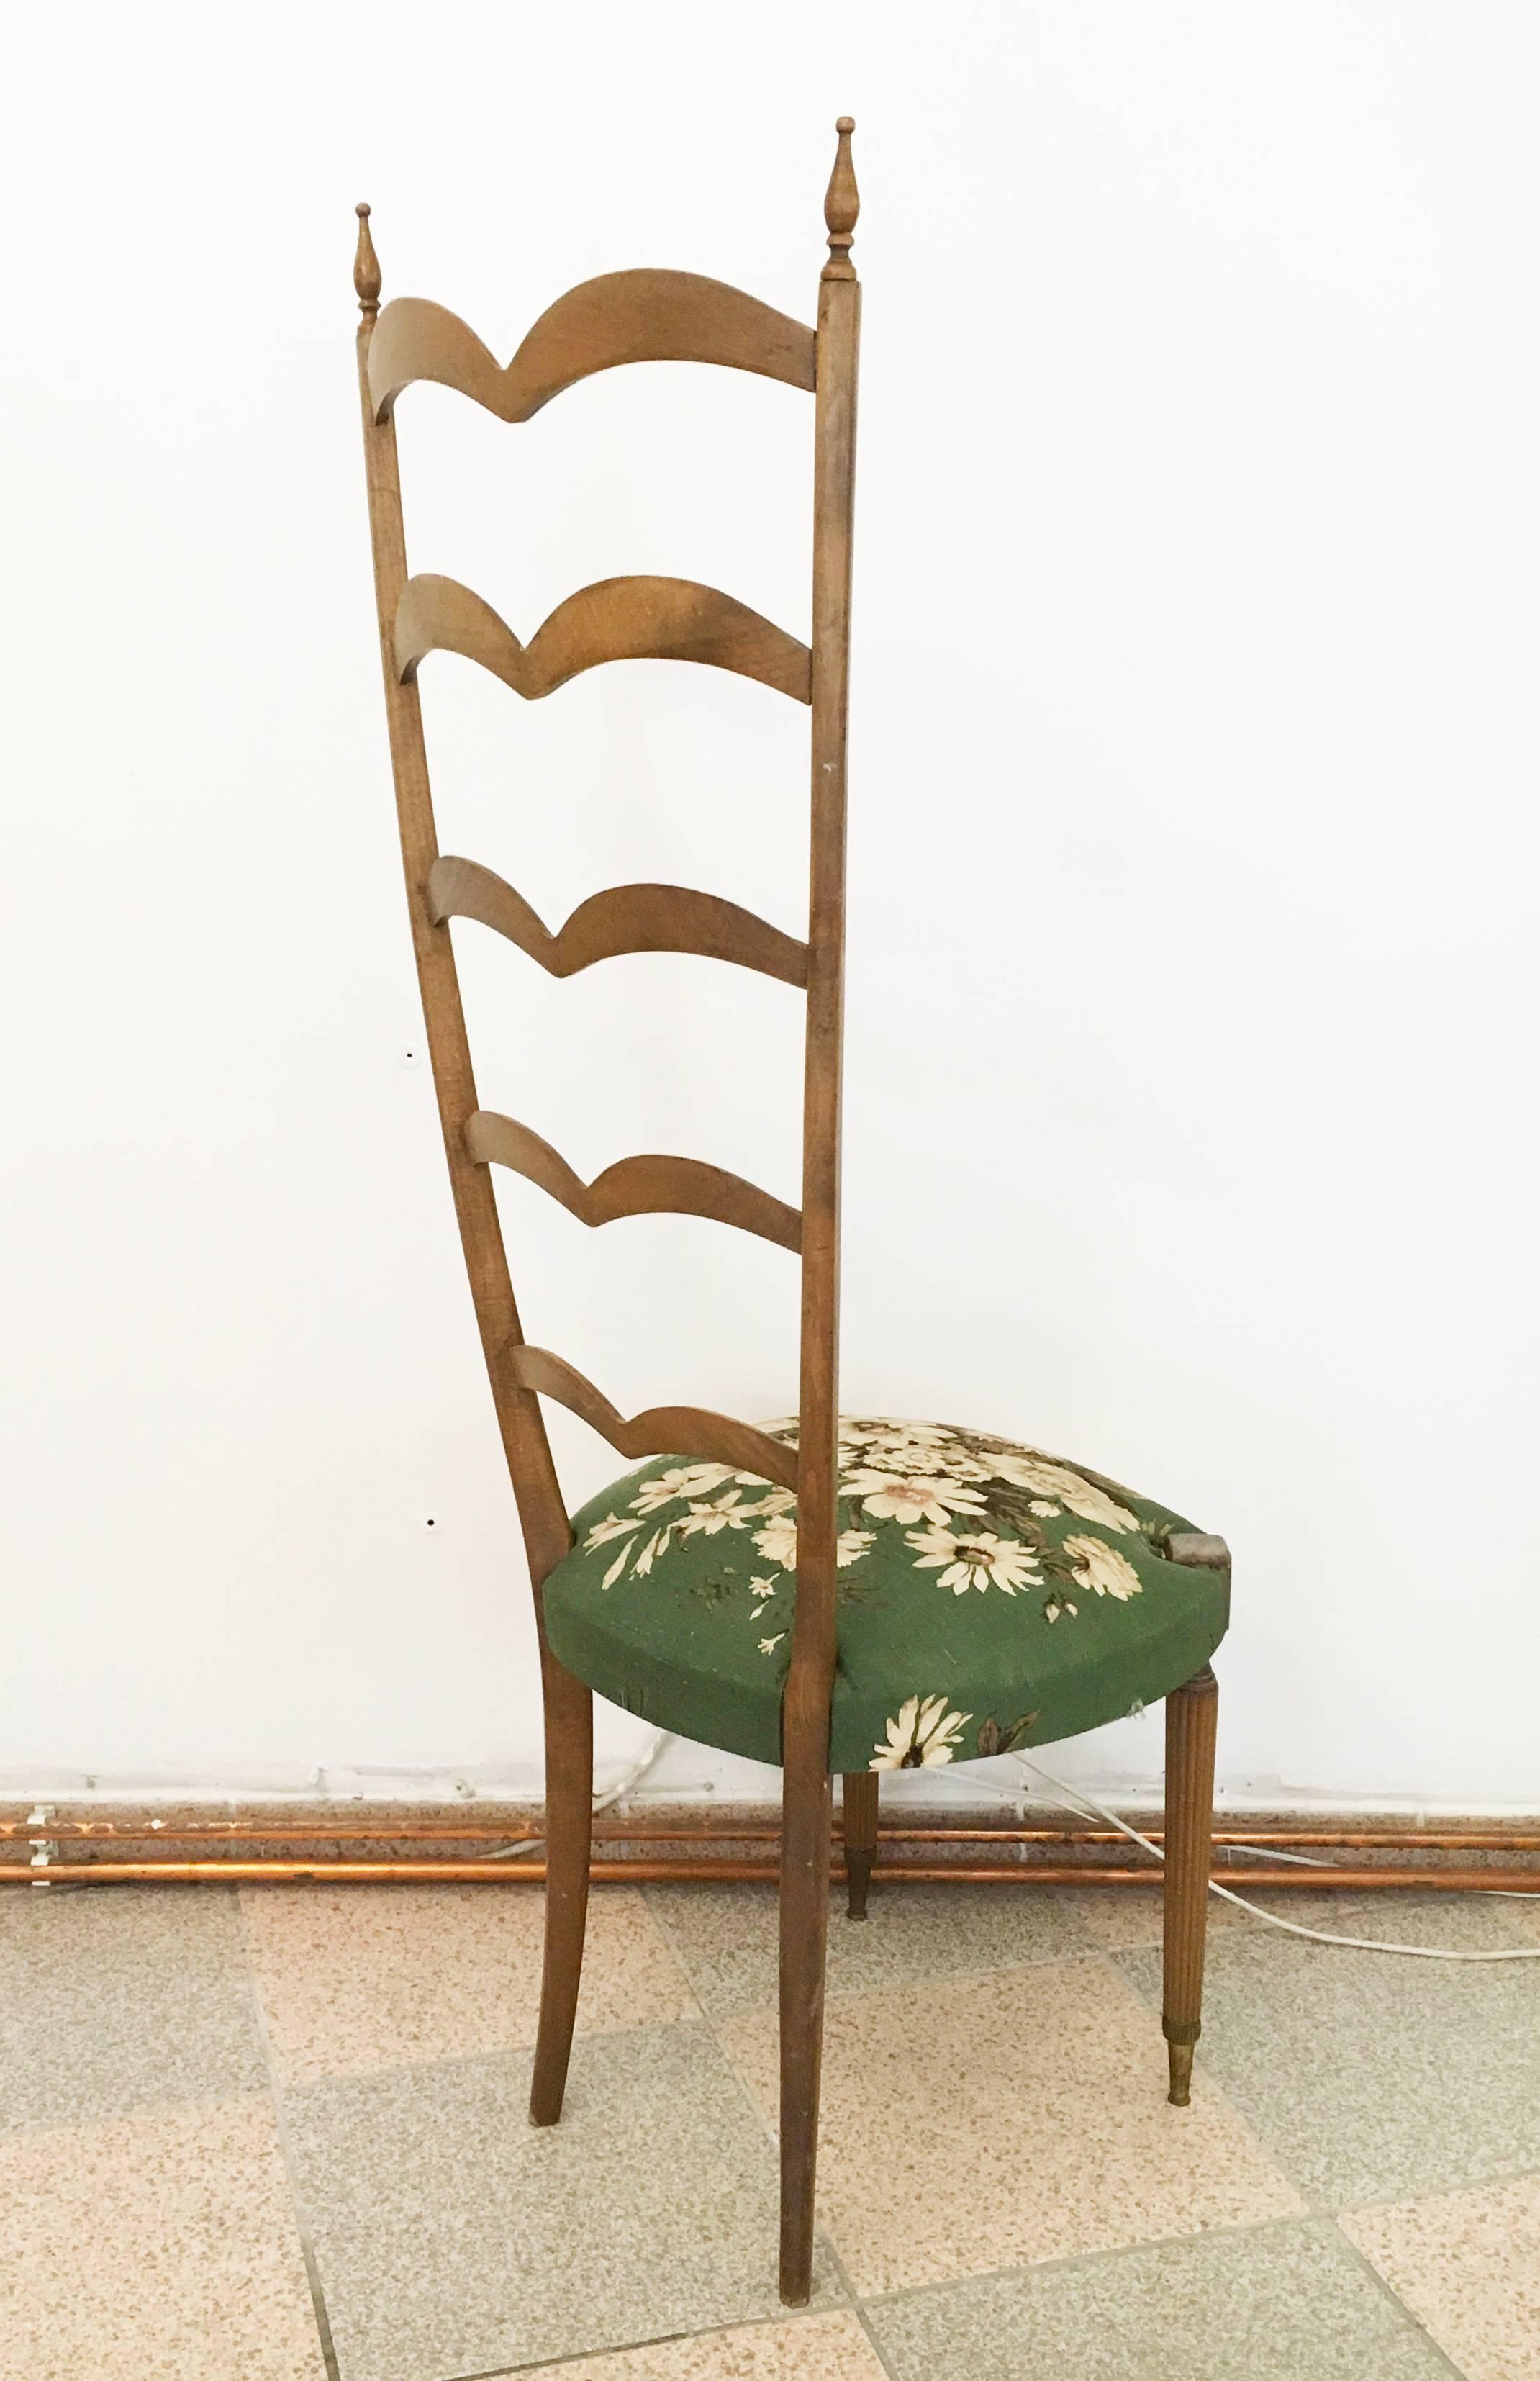 Beech wood construction high backed, front legs turned and fluted with brass ends, upholstery with spring core. Made in Austria in the 1920s, designed by Oskar Strnad or Hugo Gorge.
Very good original condition, new upholstery on request